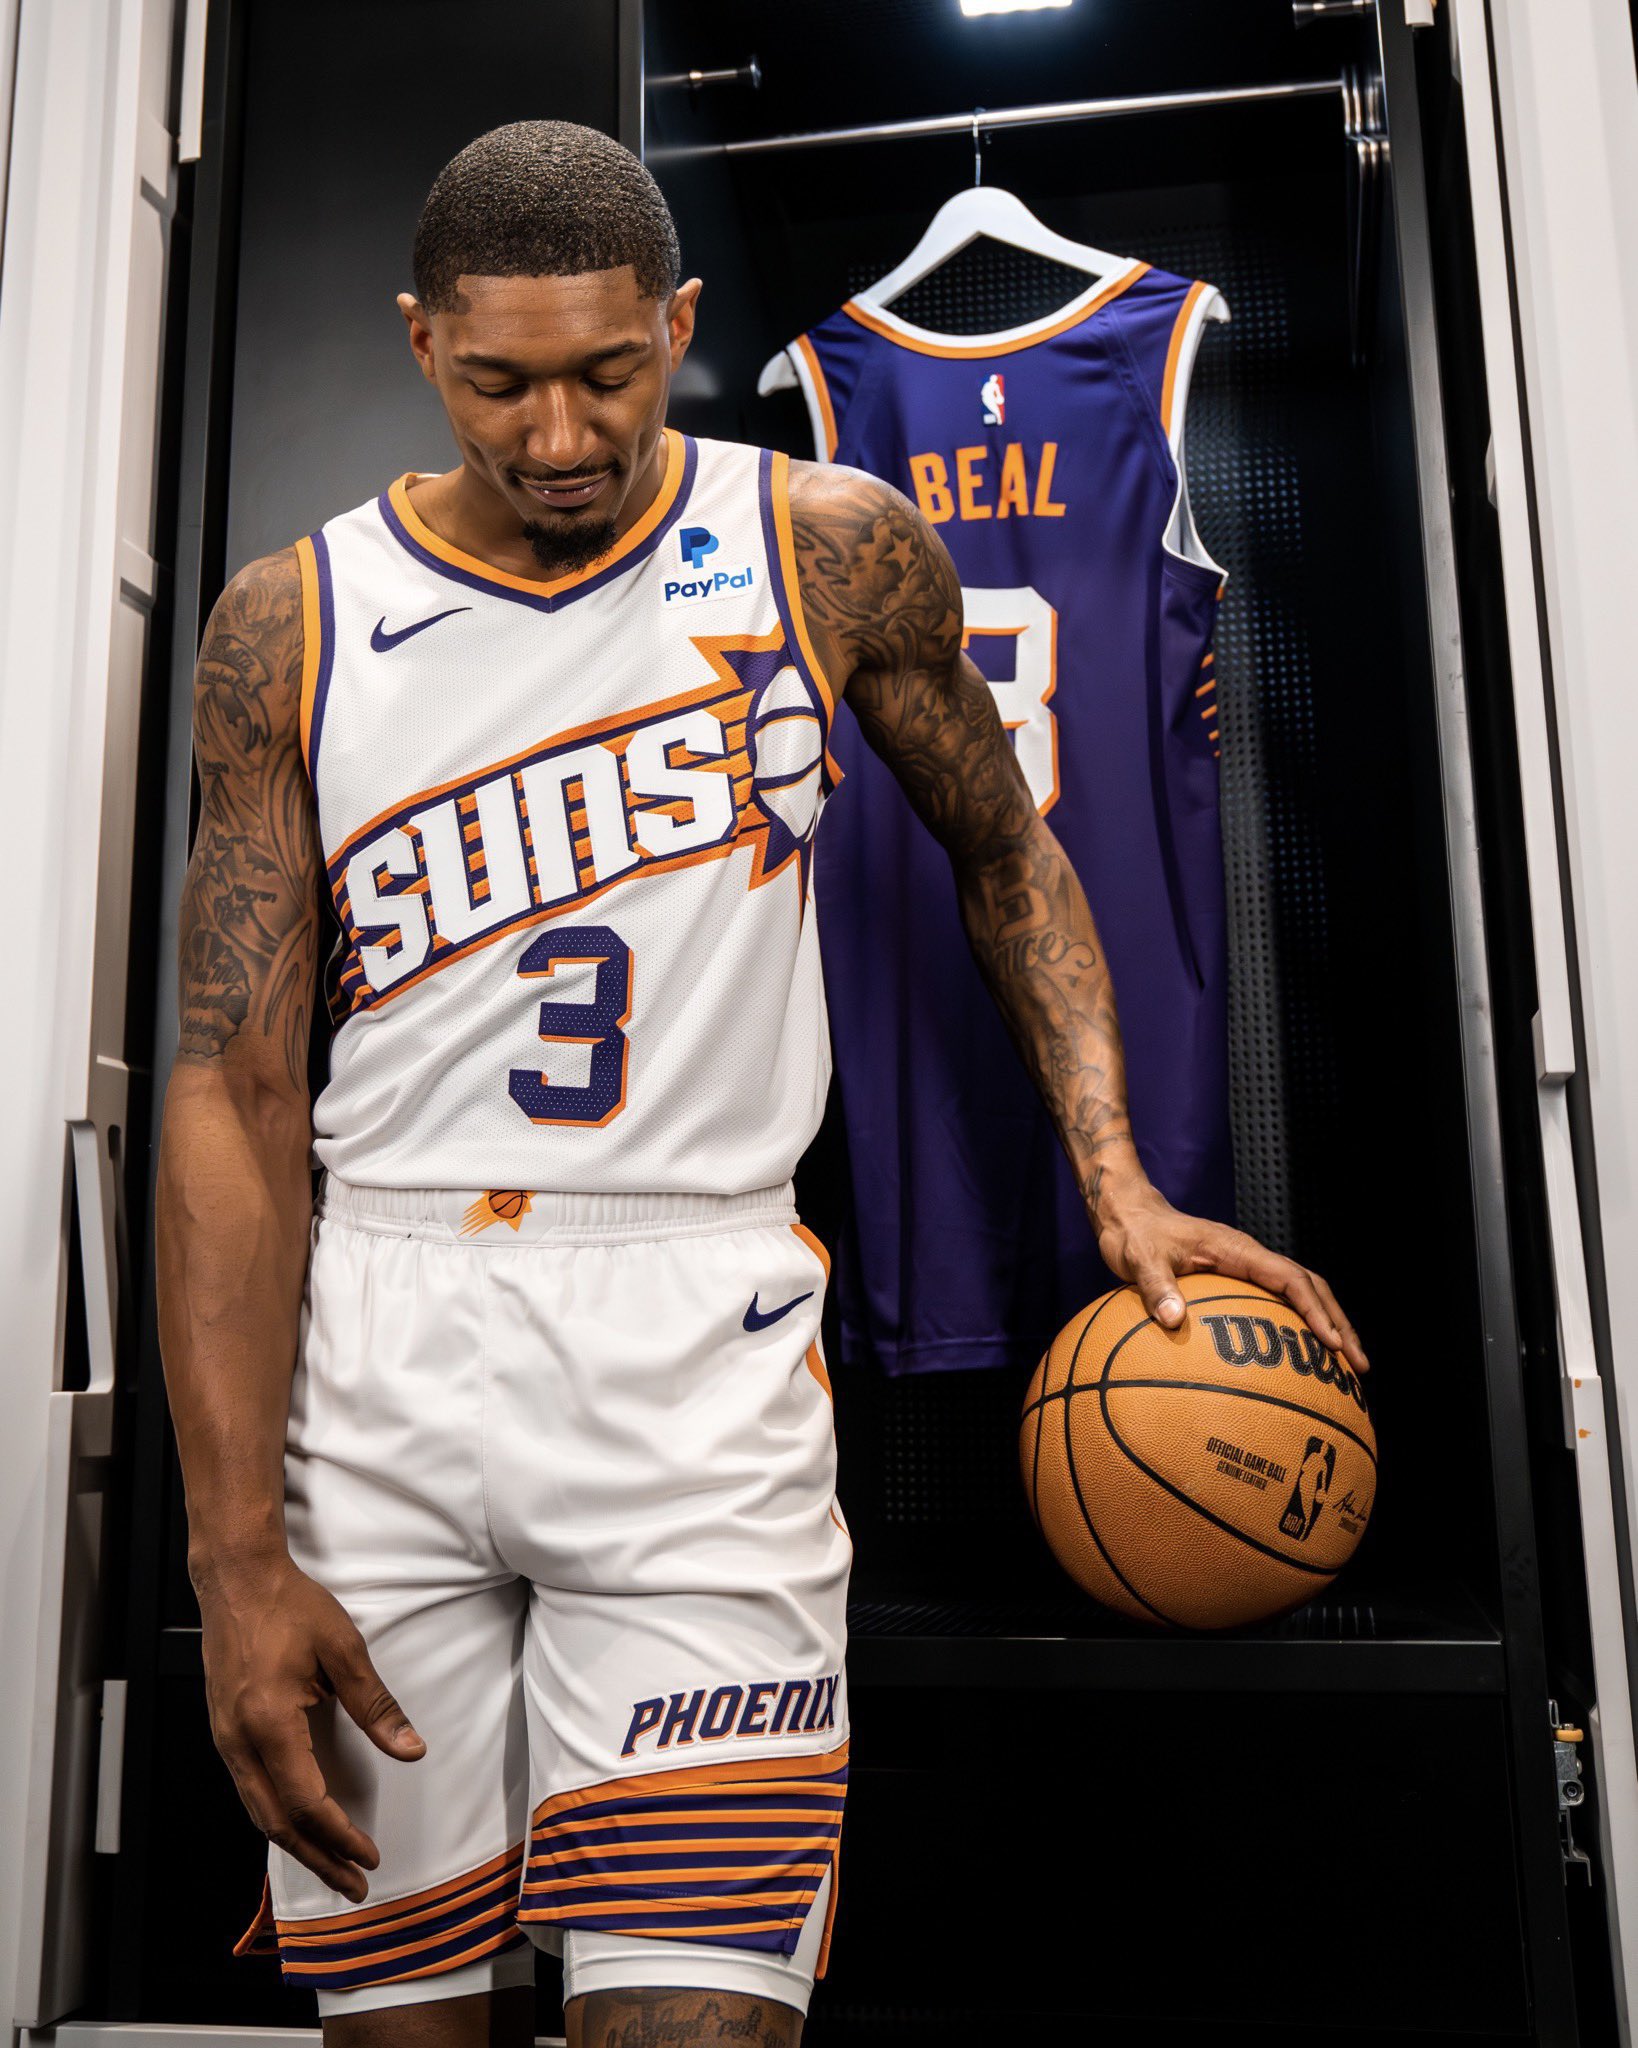 Suns tease jersey reveal: “They're back!” - Bright Side Of The Sun